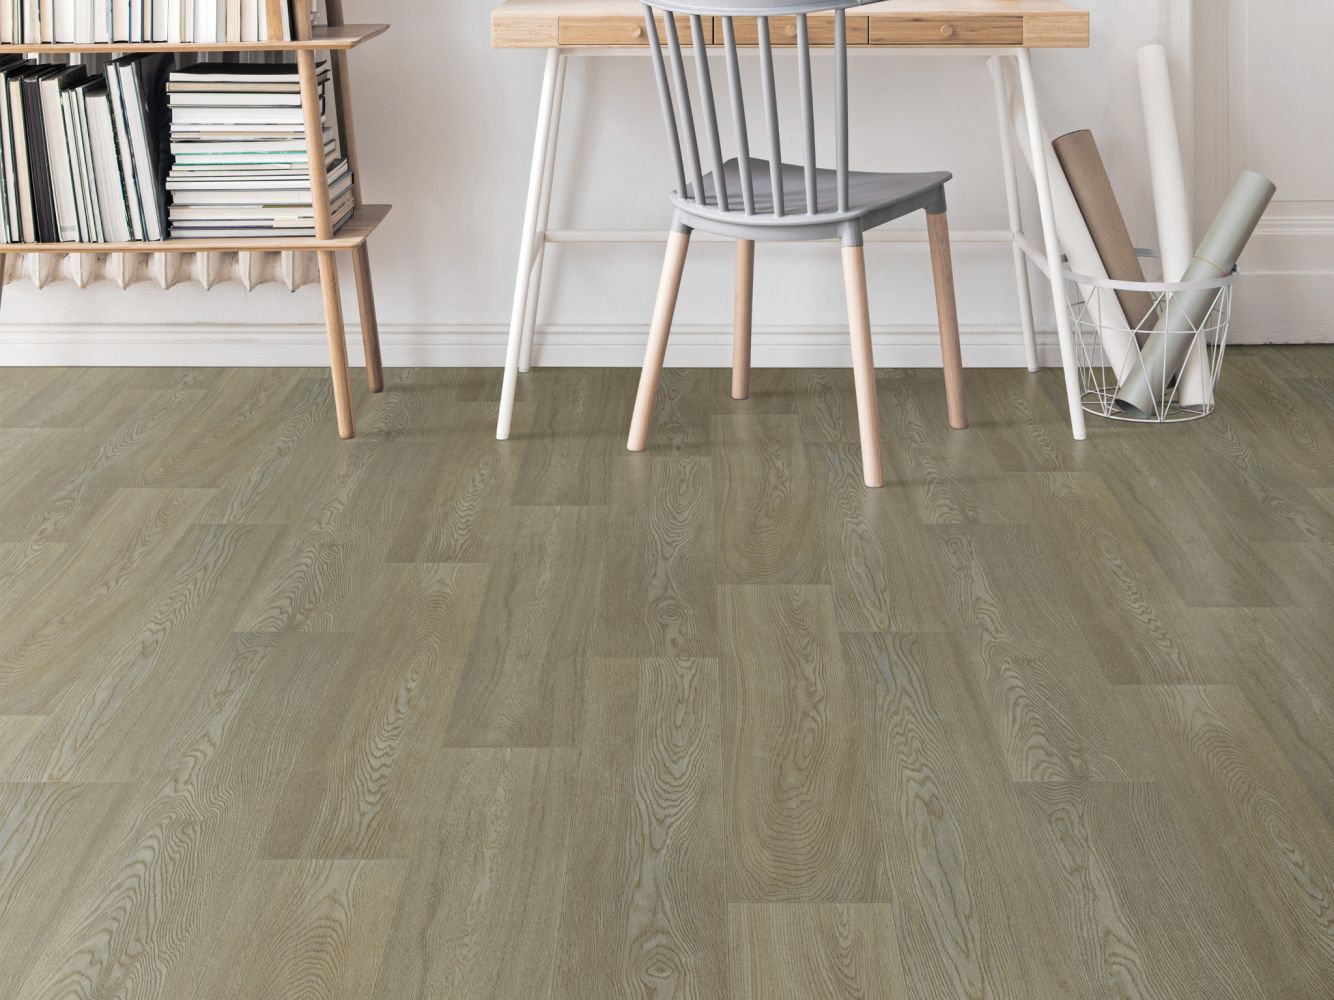 Shaw Floors Resilient Residential Cottage Chic Borbeck 00146_1048V